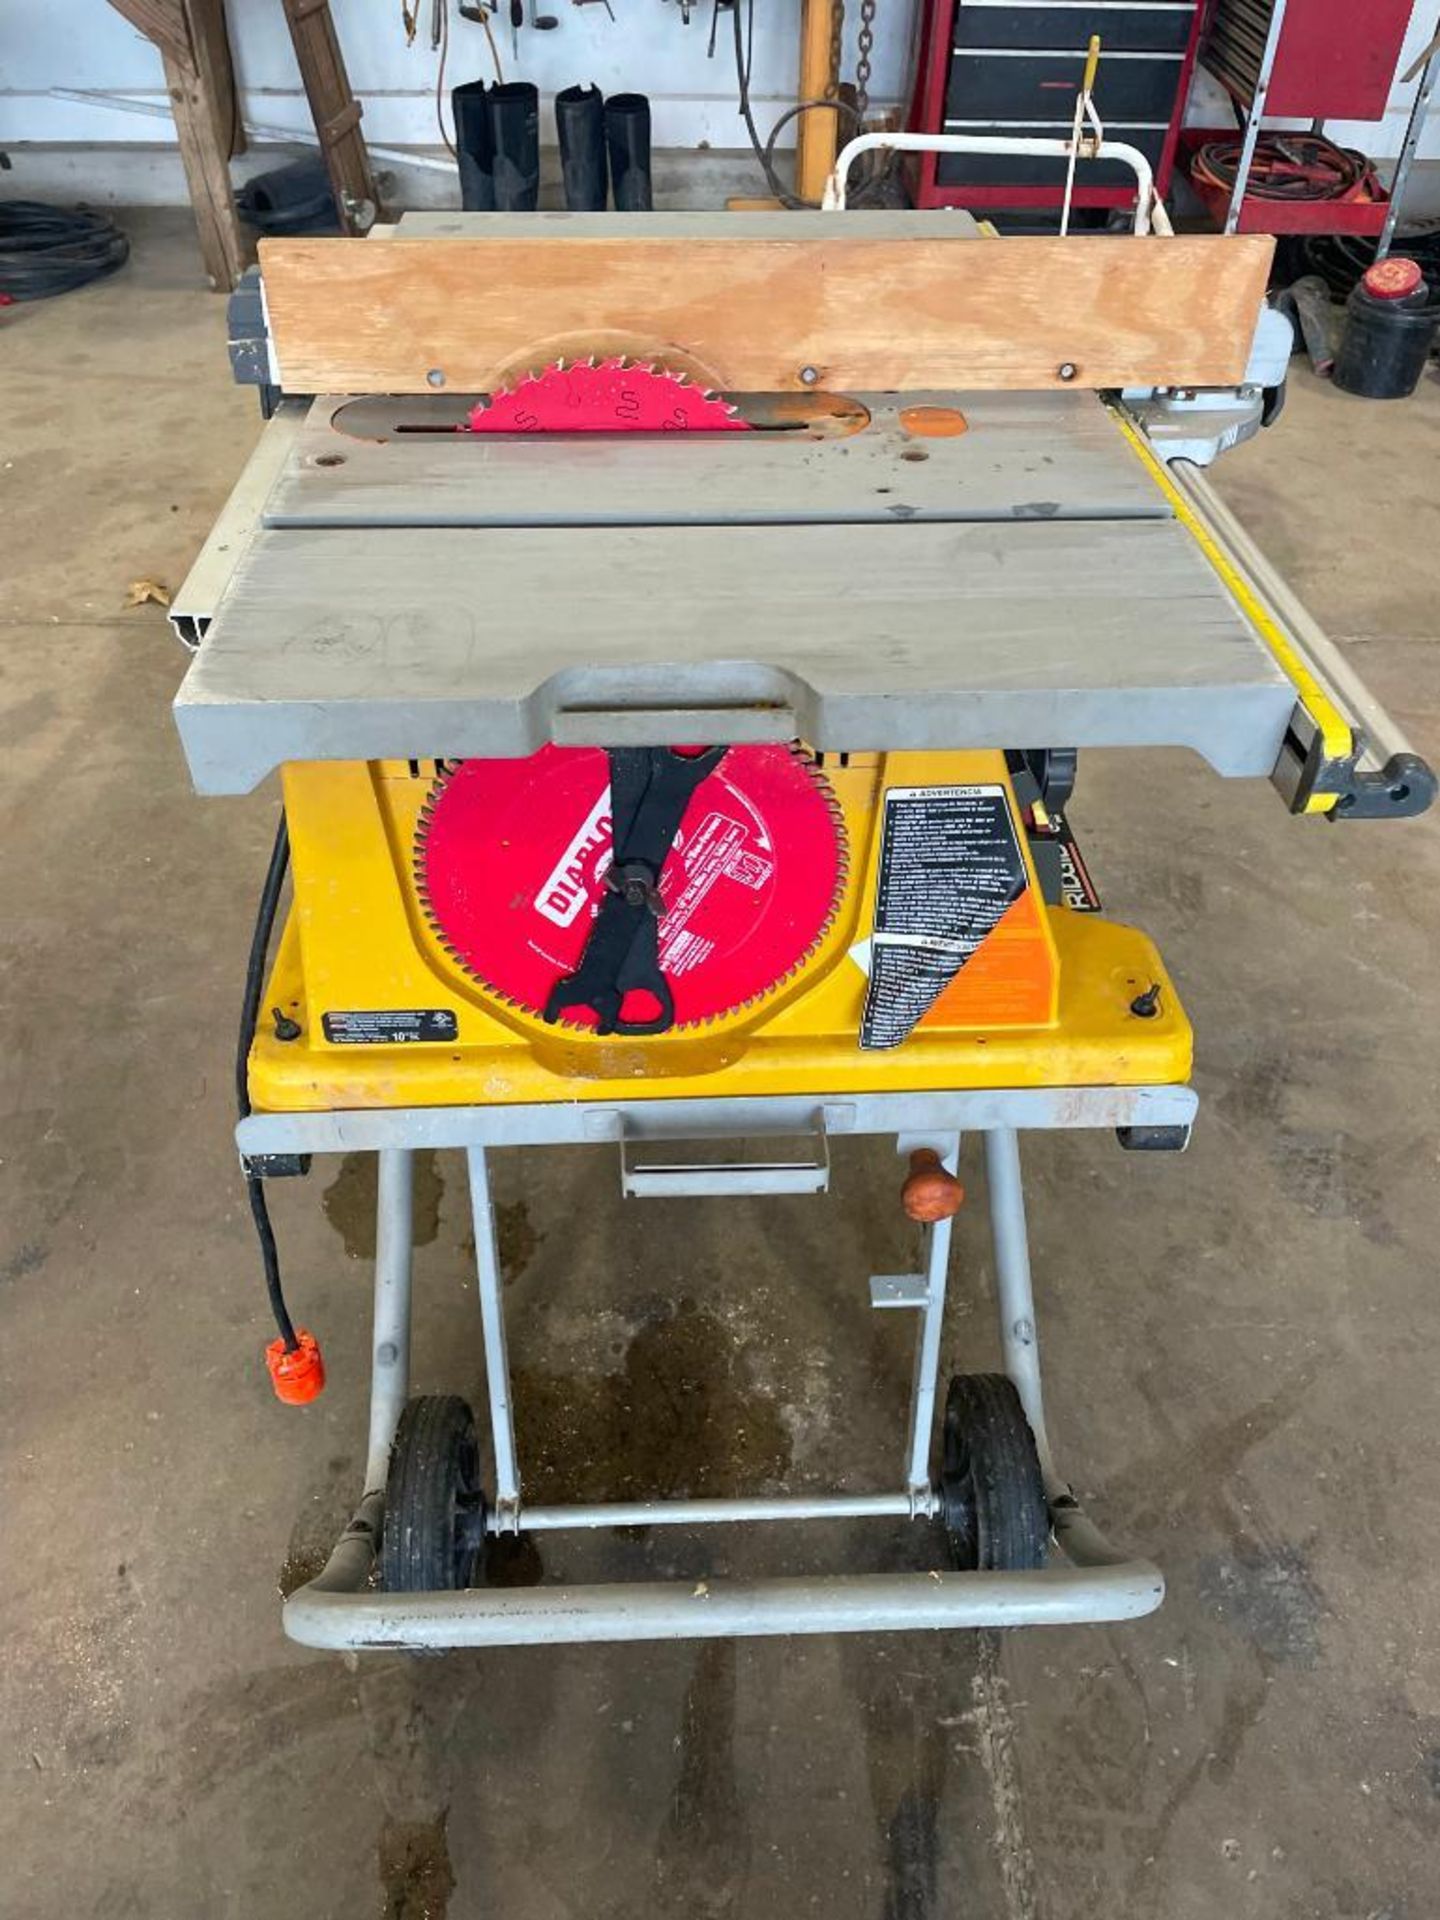 Rigid 10" Tilt Table Saw on Rigid Work-N-Haul-It Two Wheel Work Stand. Located in Hazelwood, MO - Image 3 of 6